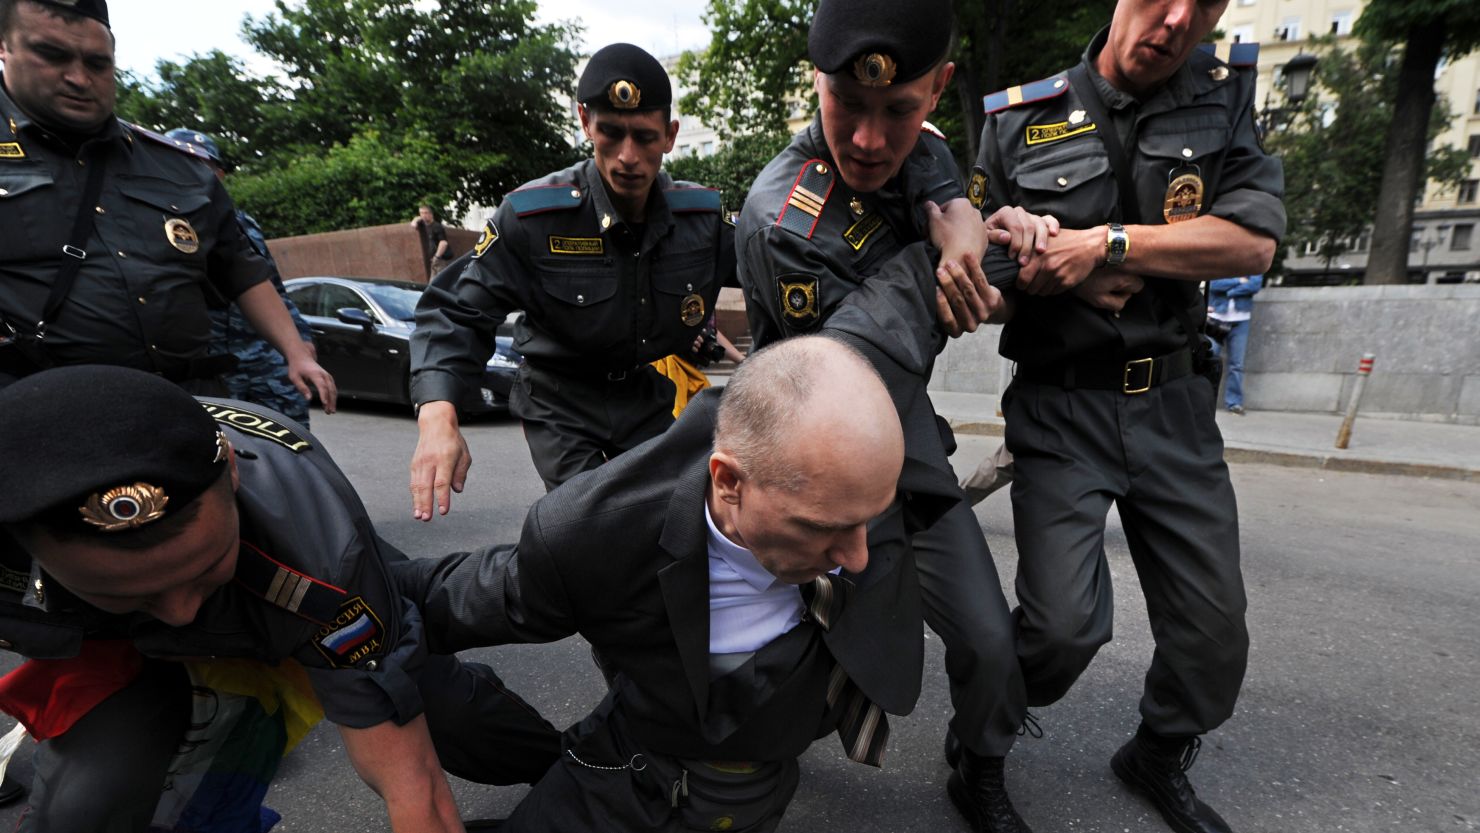 Russian police detain a man during a rally for gay rights in Moscow.